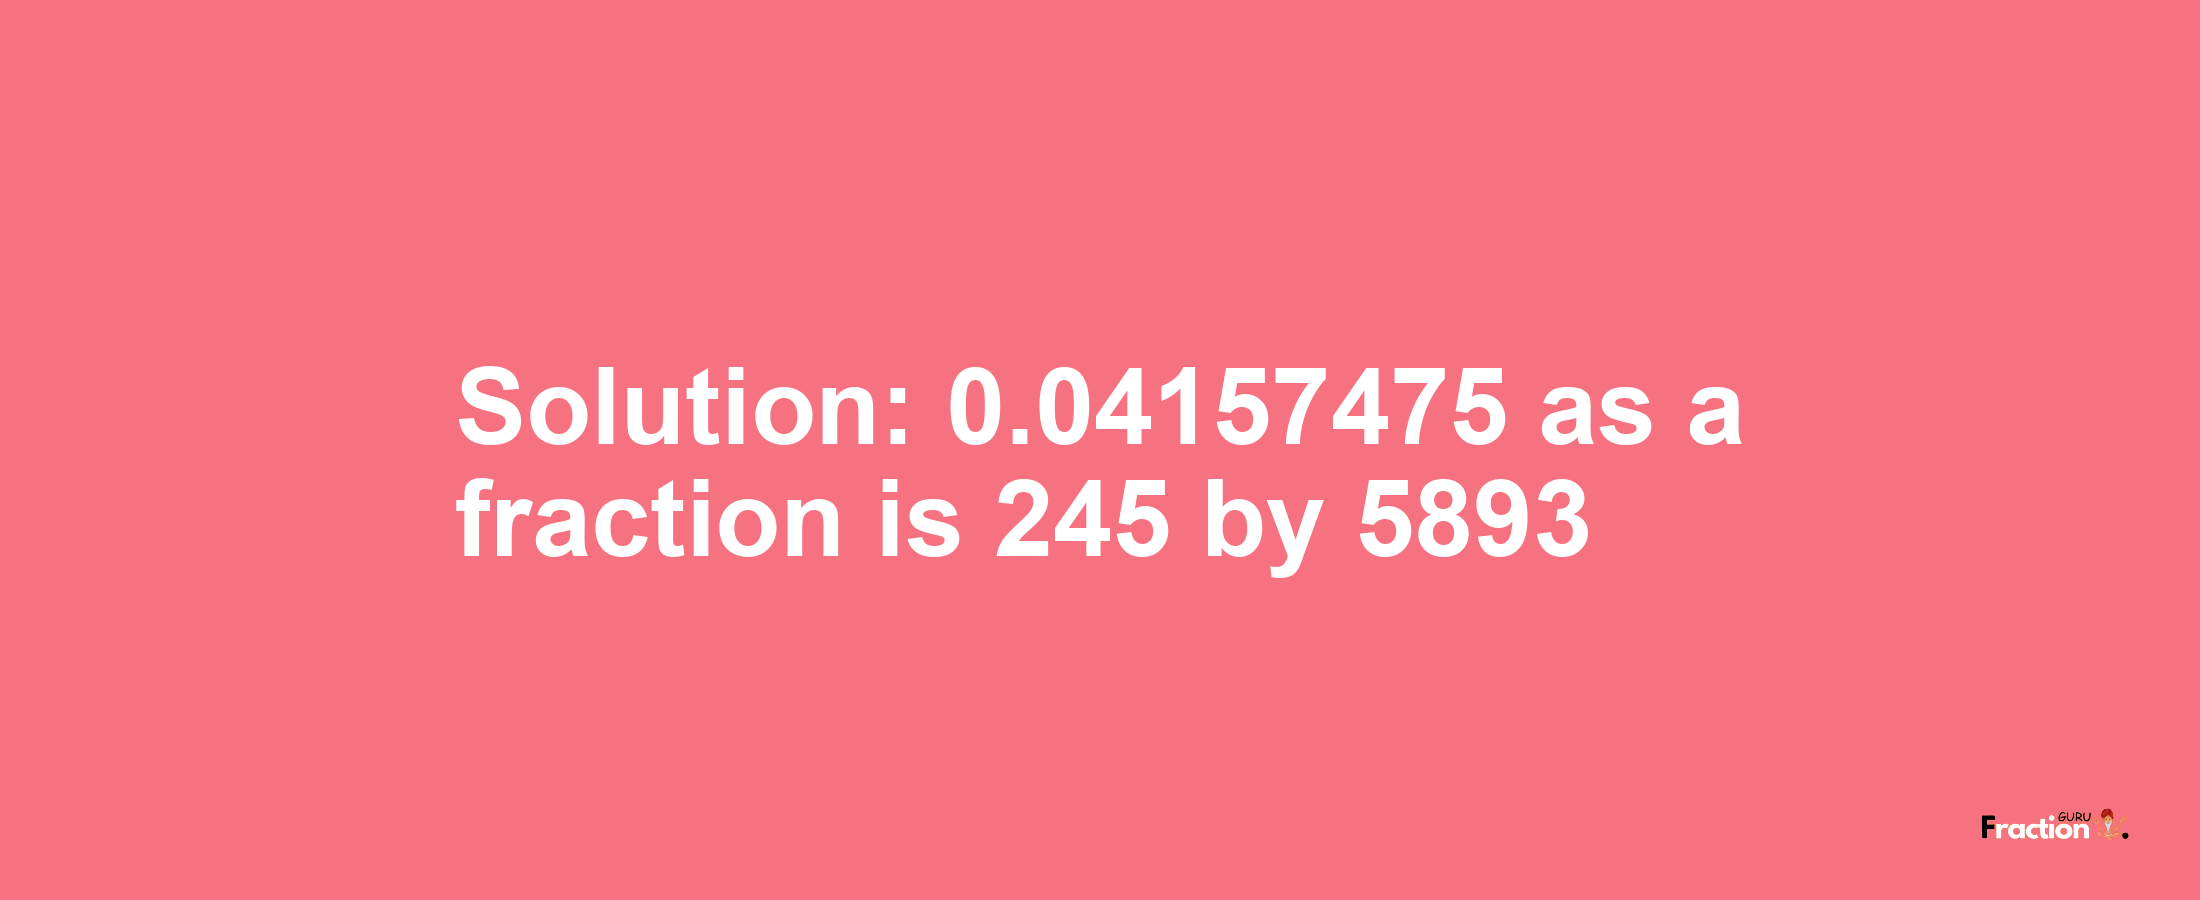 Solution:0.04157475 as a fraction is 245/5893